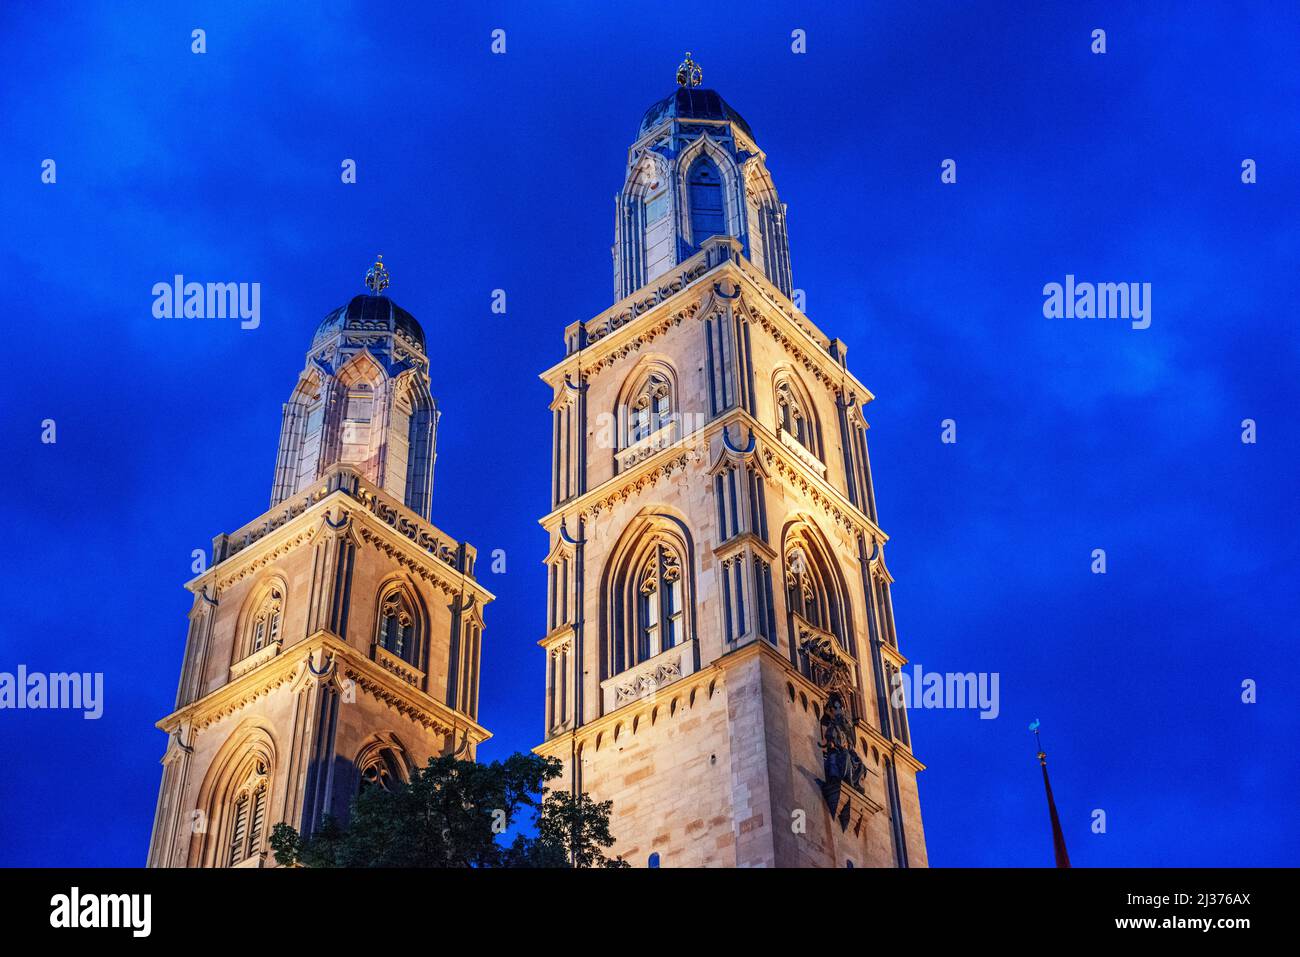 The cityscape of Zurich at night with the river Limmat and the Grossmuenster cathedral, Zurich Switzerland, Europe. Stock Photo